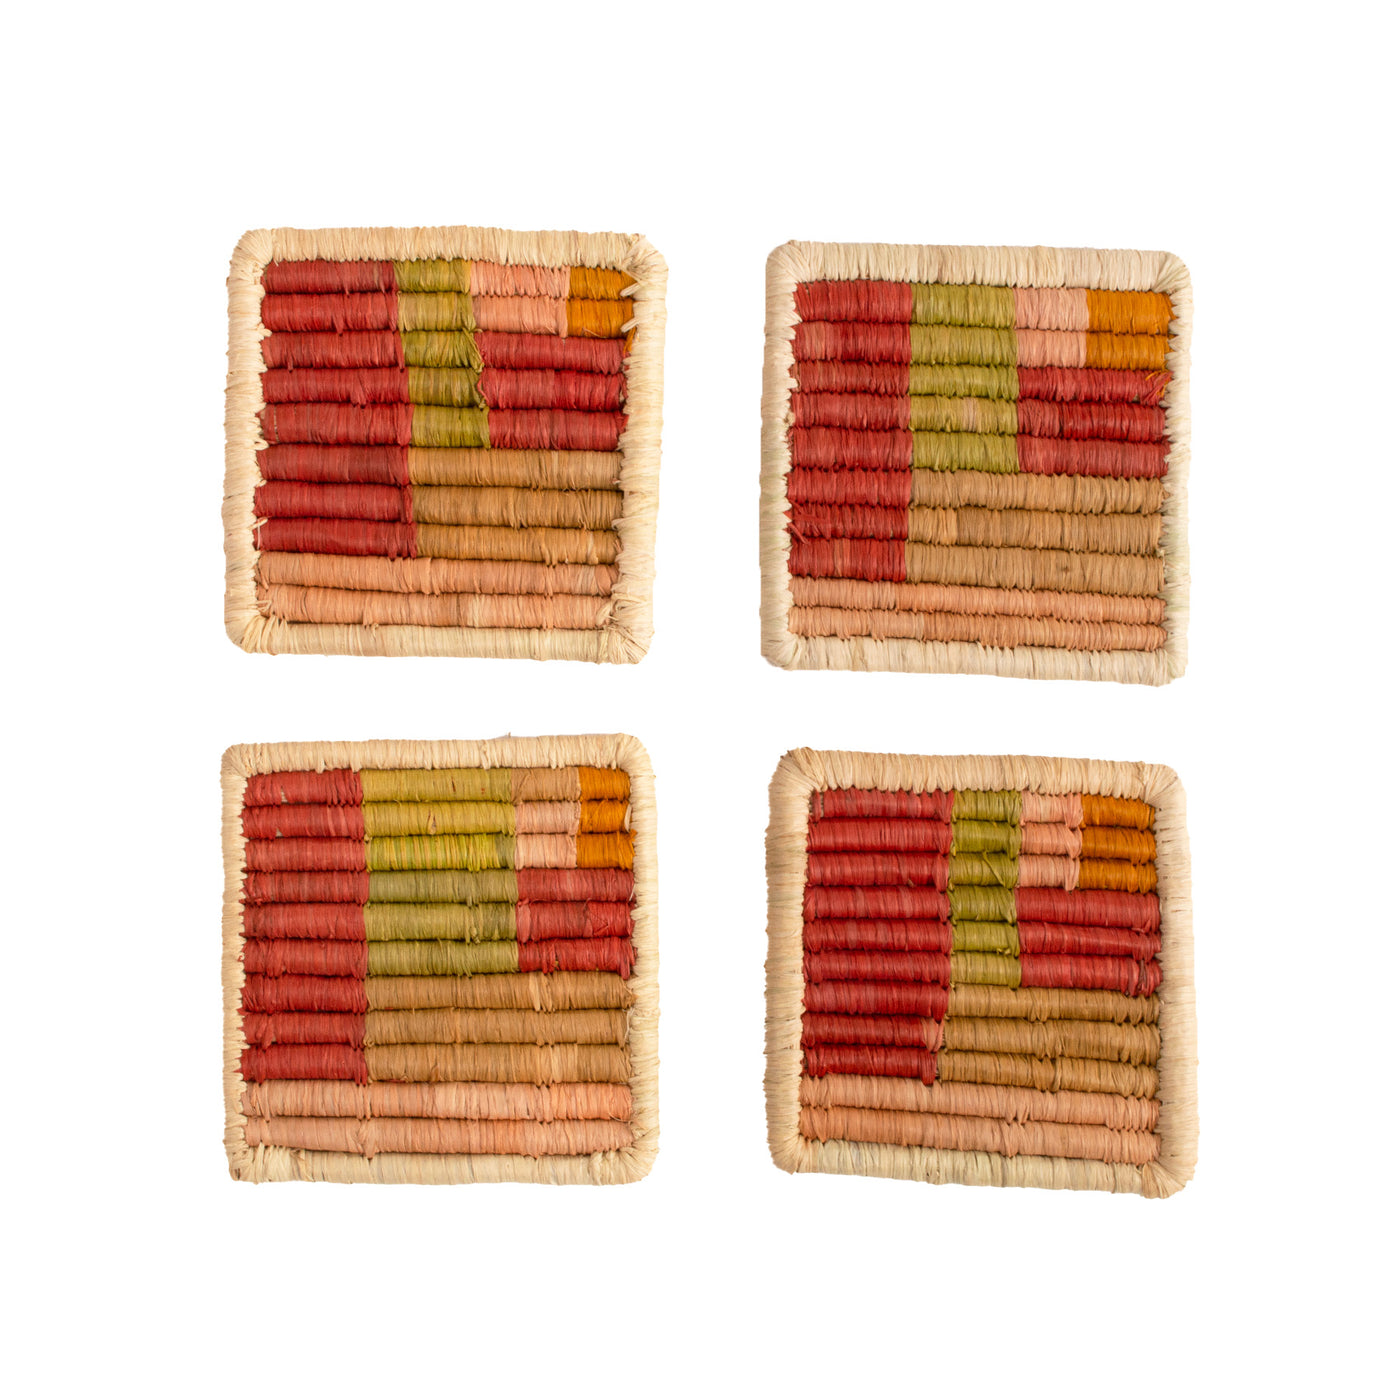 Town Square Coasters - Revival, Set of 4